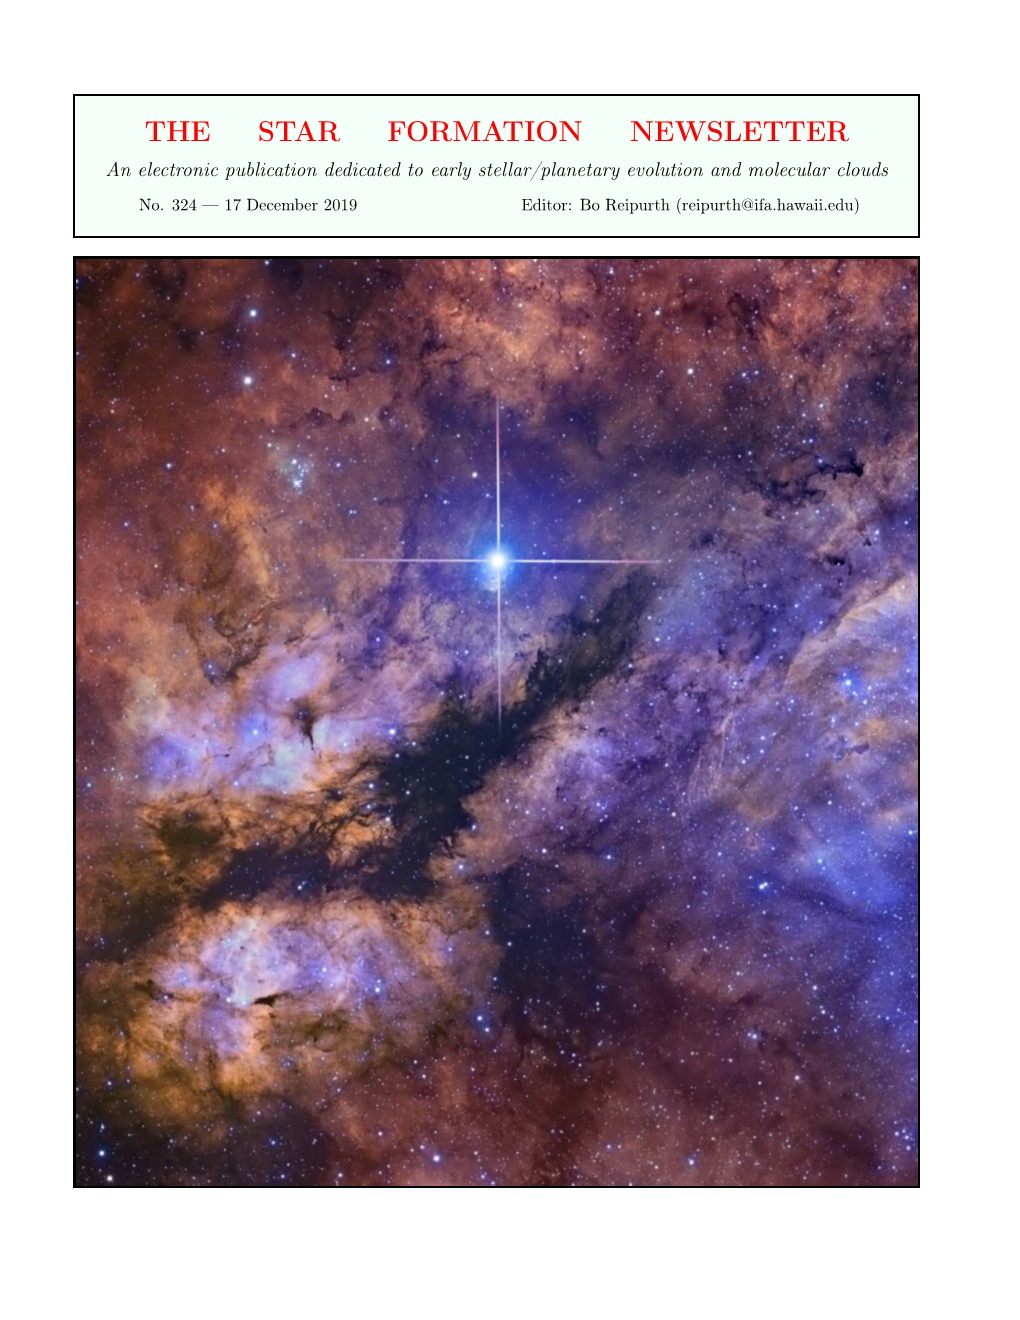 324 — 17 December 2019 Editor: Bo Reipurth (Reipurth@Ifa.Hawaii.Edu) List of Contents the Star Formation Newsletter Interview